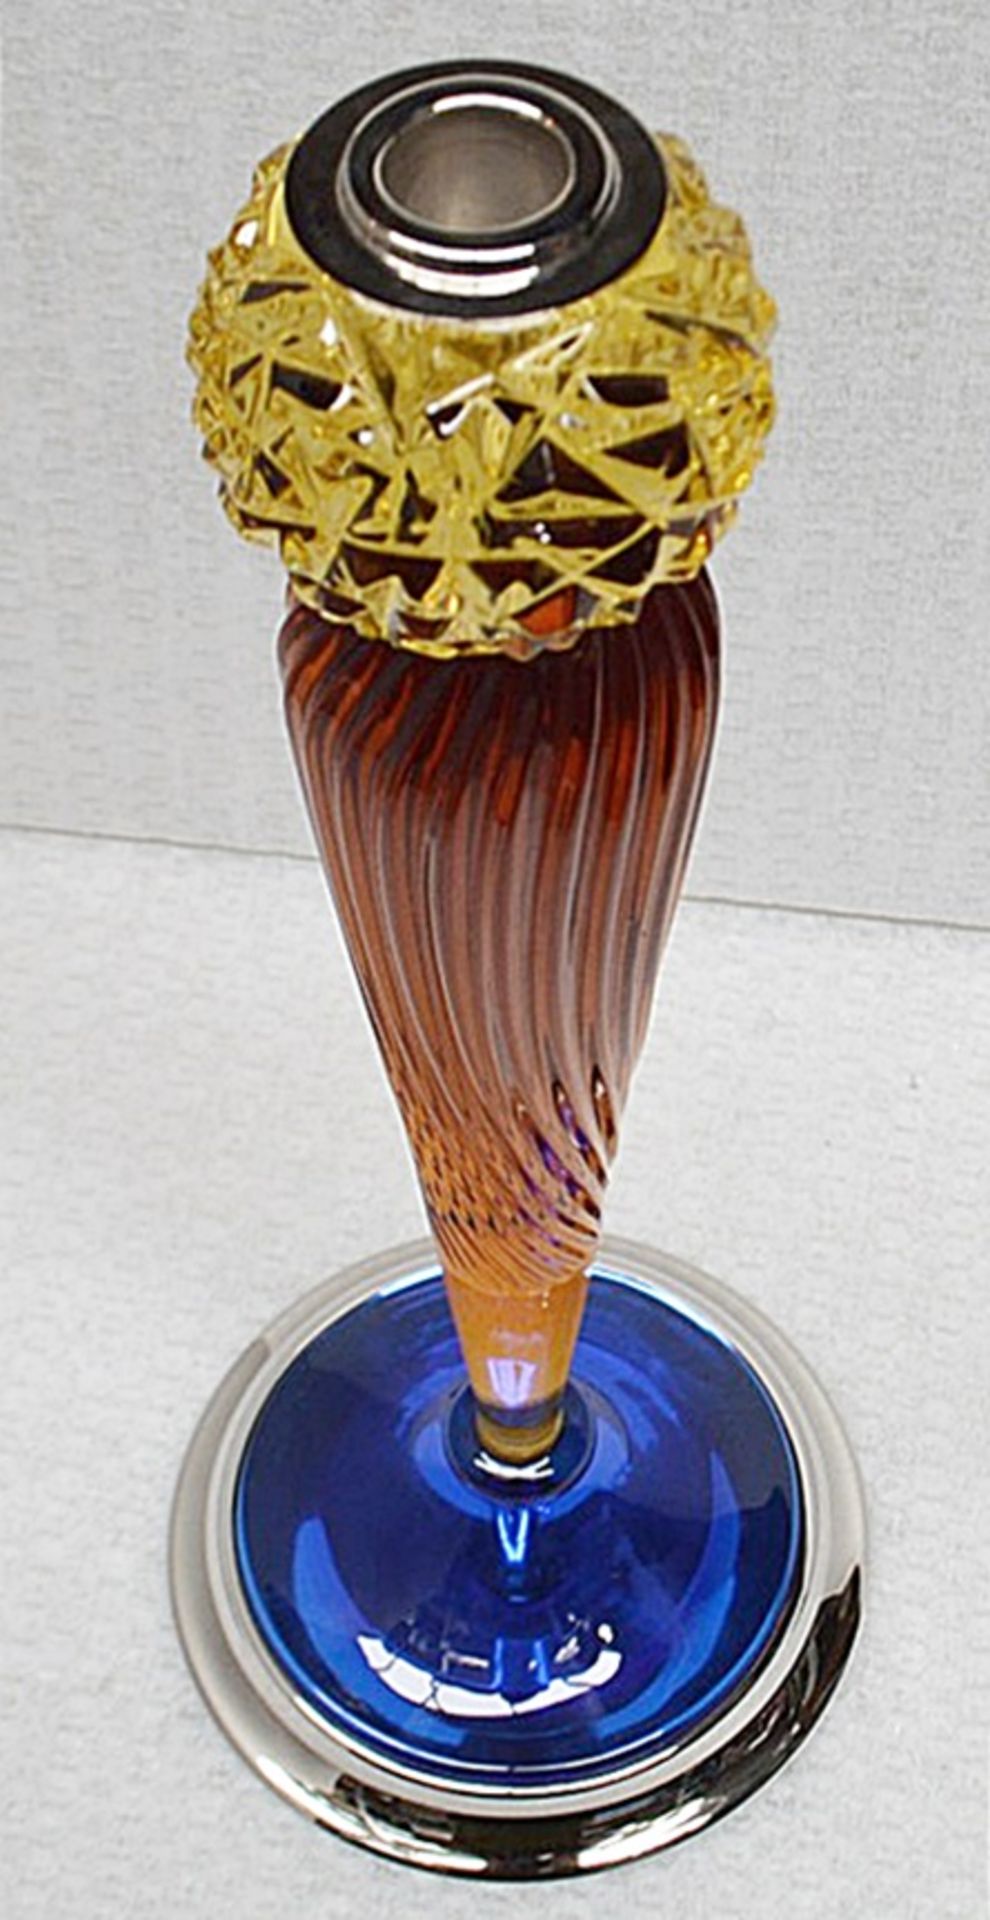 1 x BALDI 'Home Jewels' Italian Hand-crafted Artisan 'Sphere' Candle Stick *Original RRP £2.665.00* - Image 3 of 3